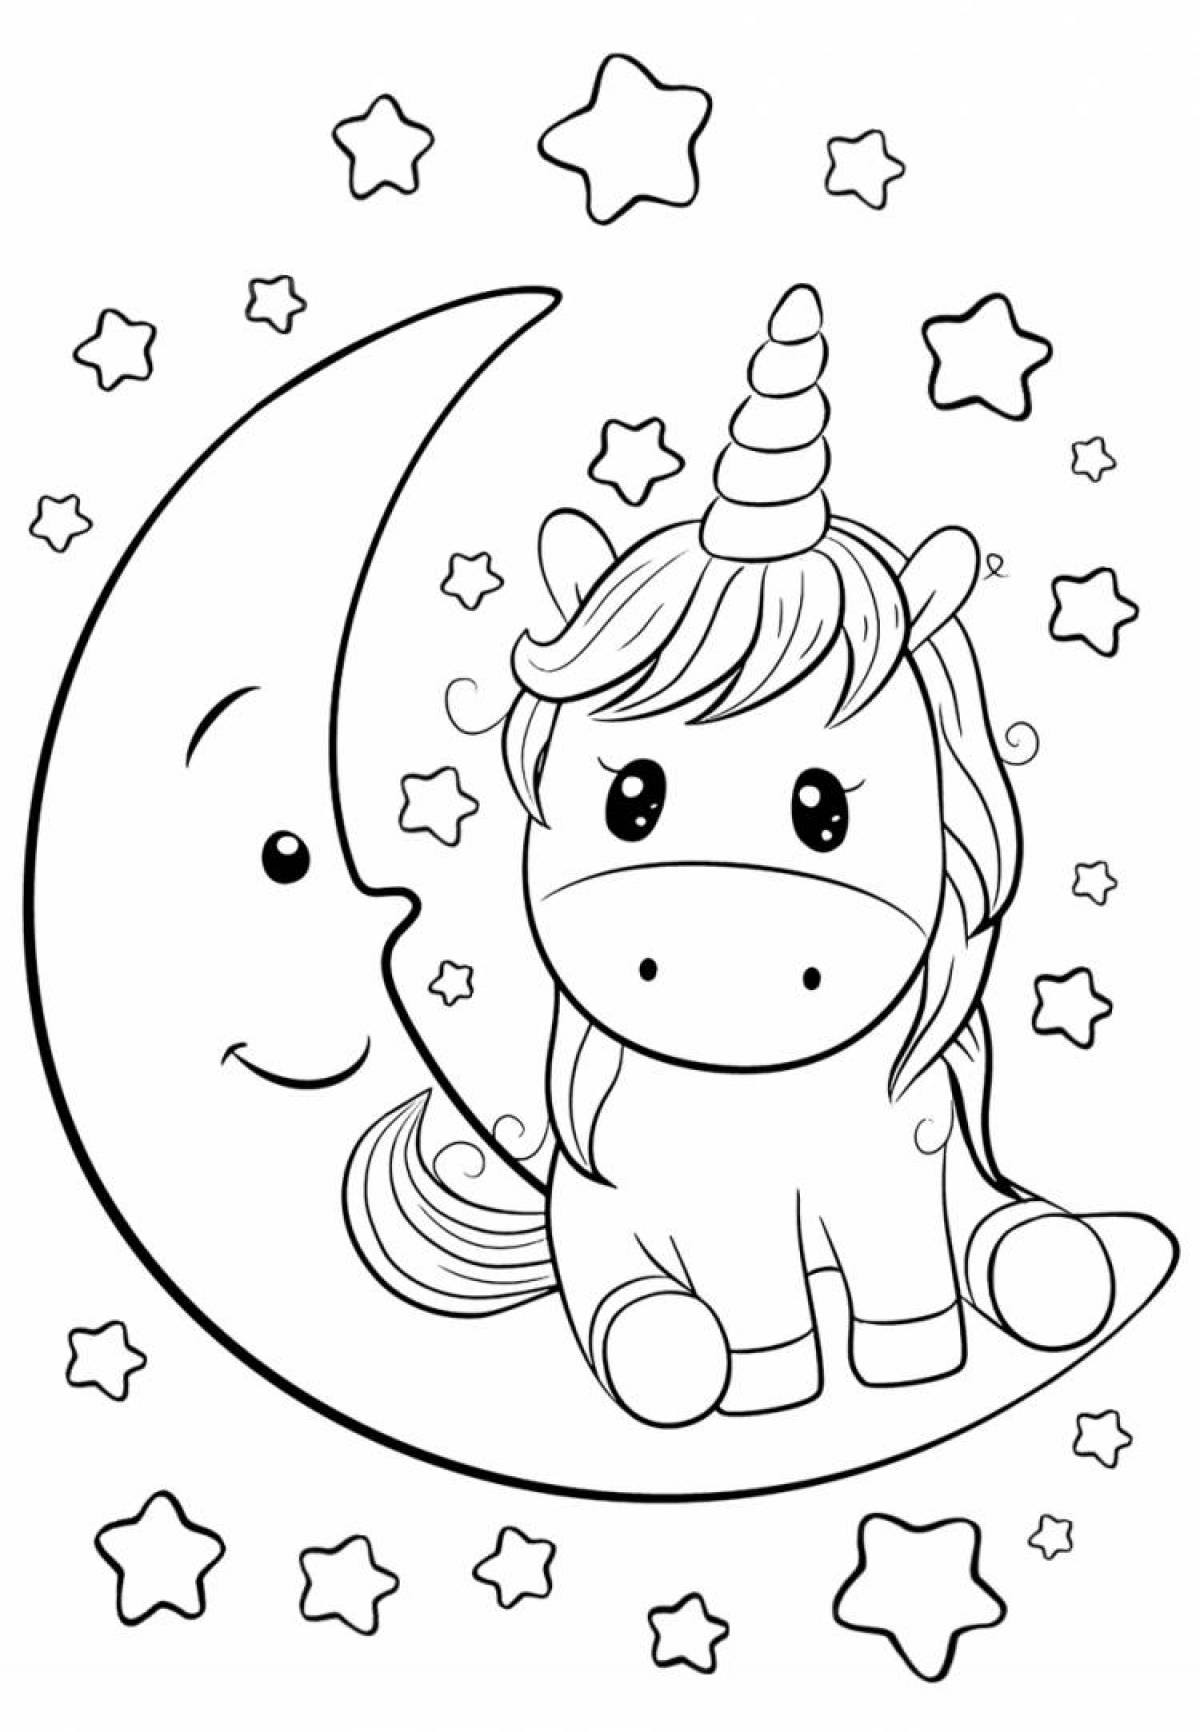 Unicorn live coloring for kids